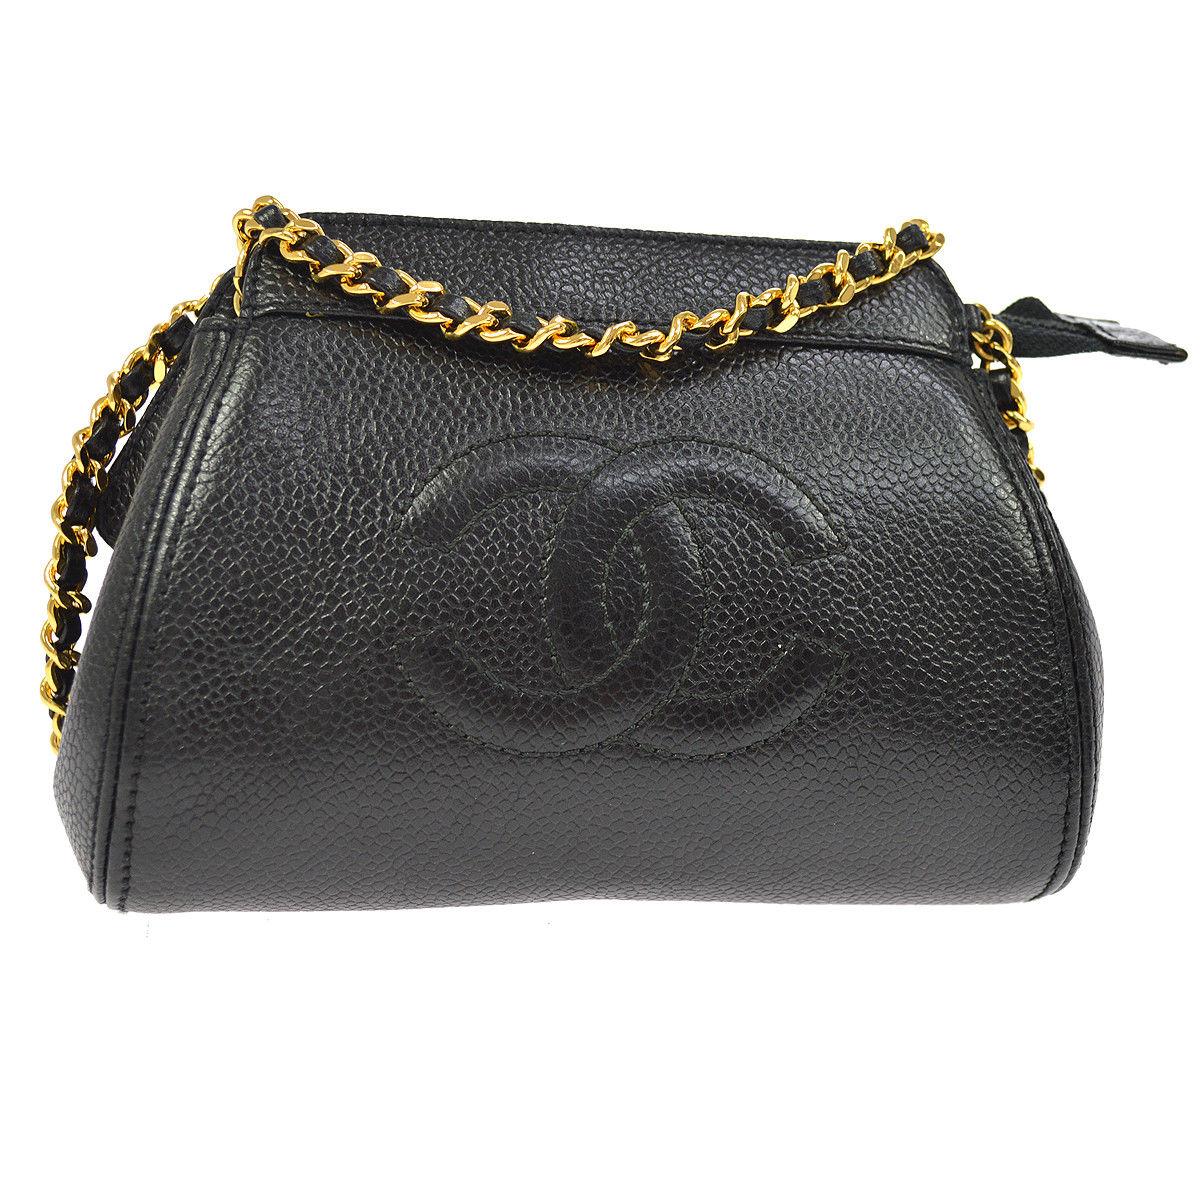 Chanel Black Caviar Leather Gold Mini 2 in 1 Clutch Party Shoulder Bag